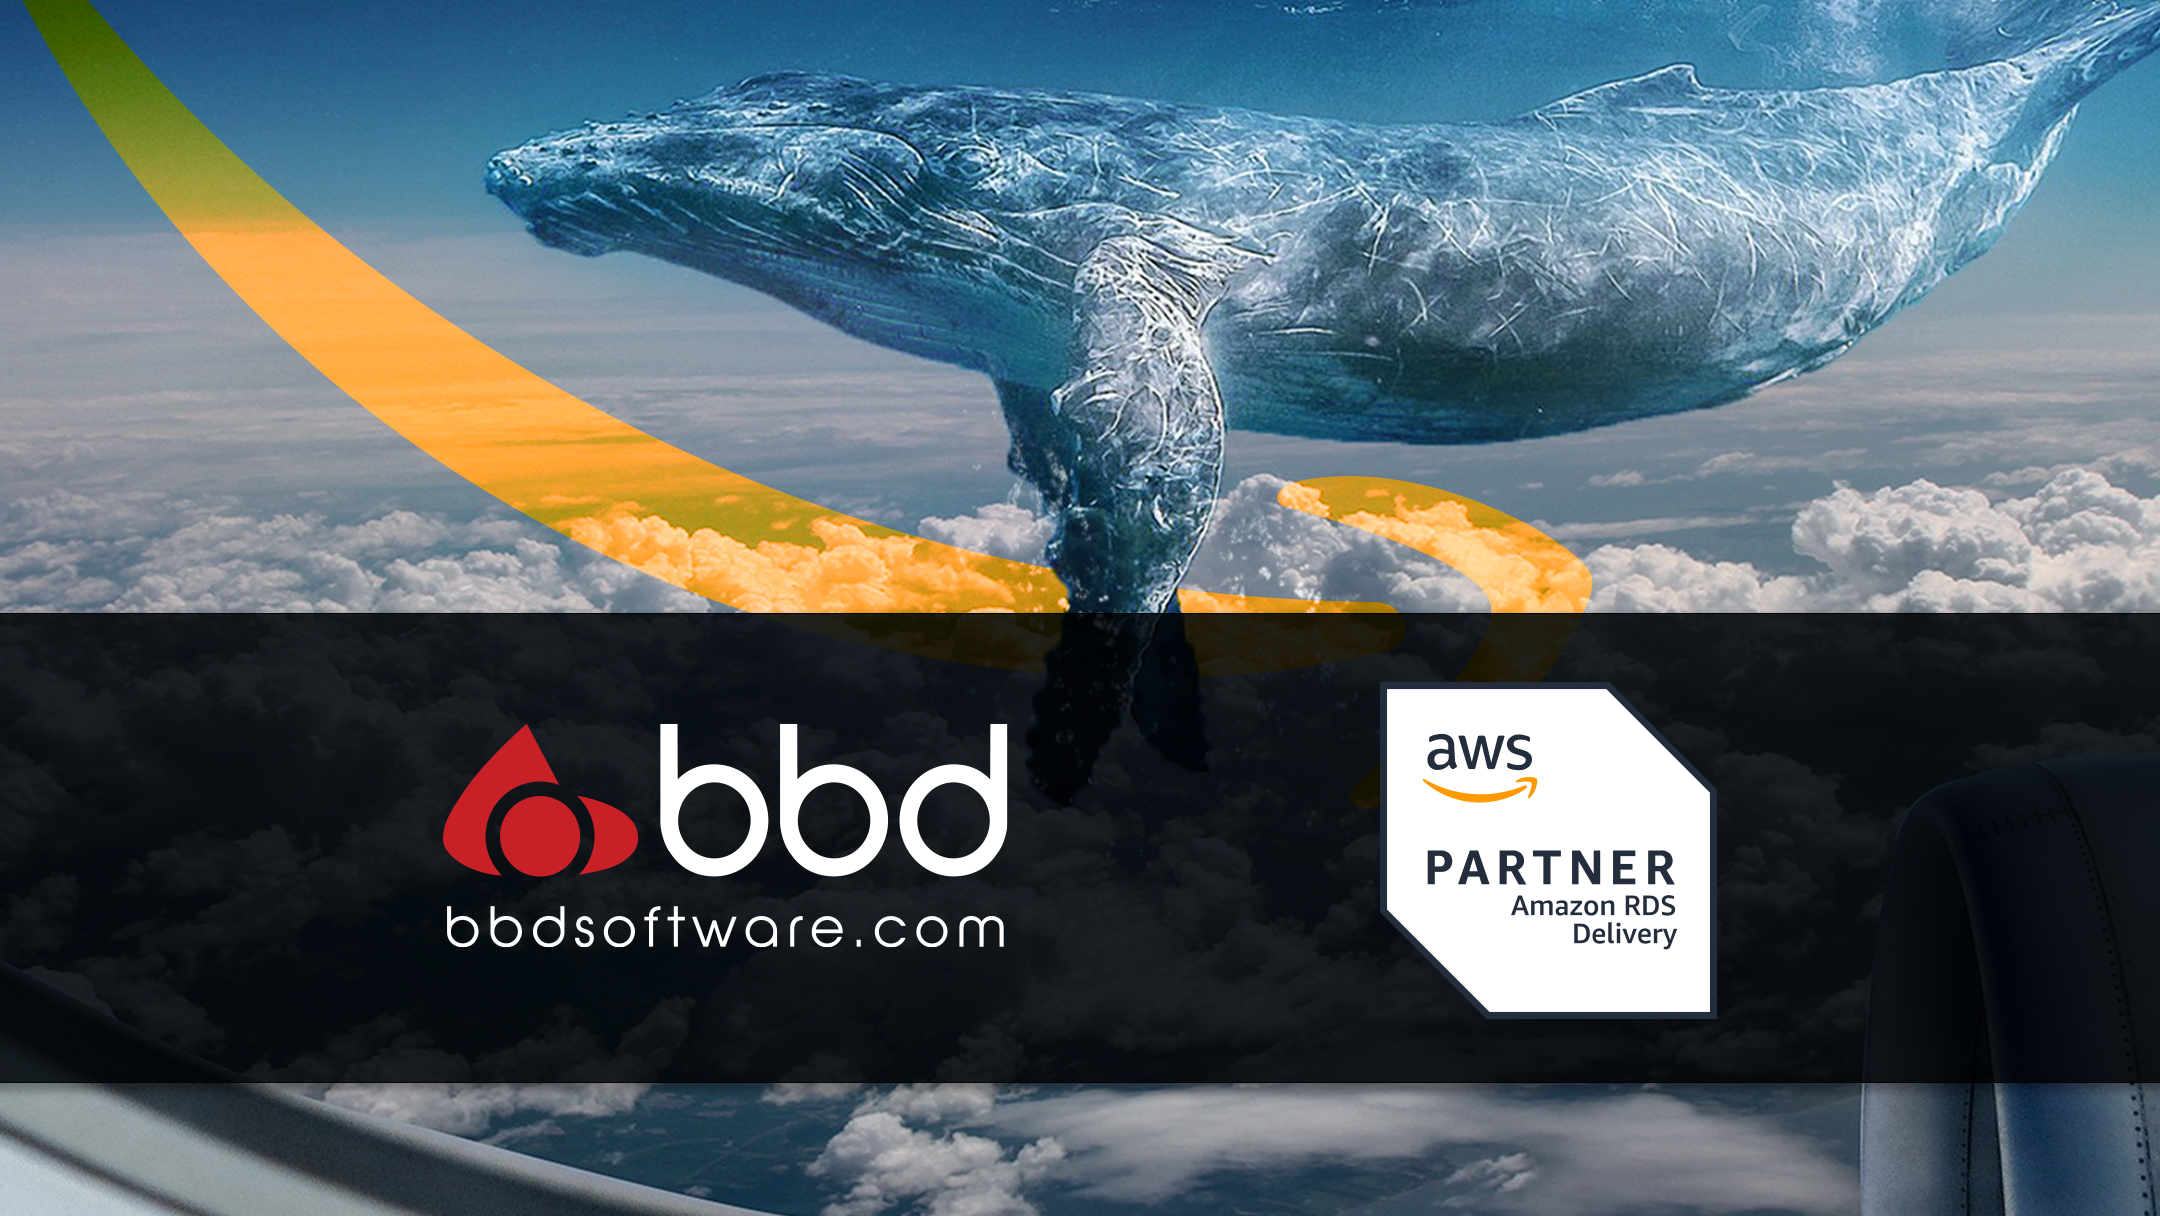 BBD awarded another AWS Service Delivery Partner designation